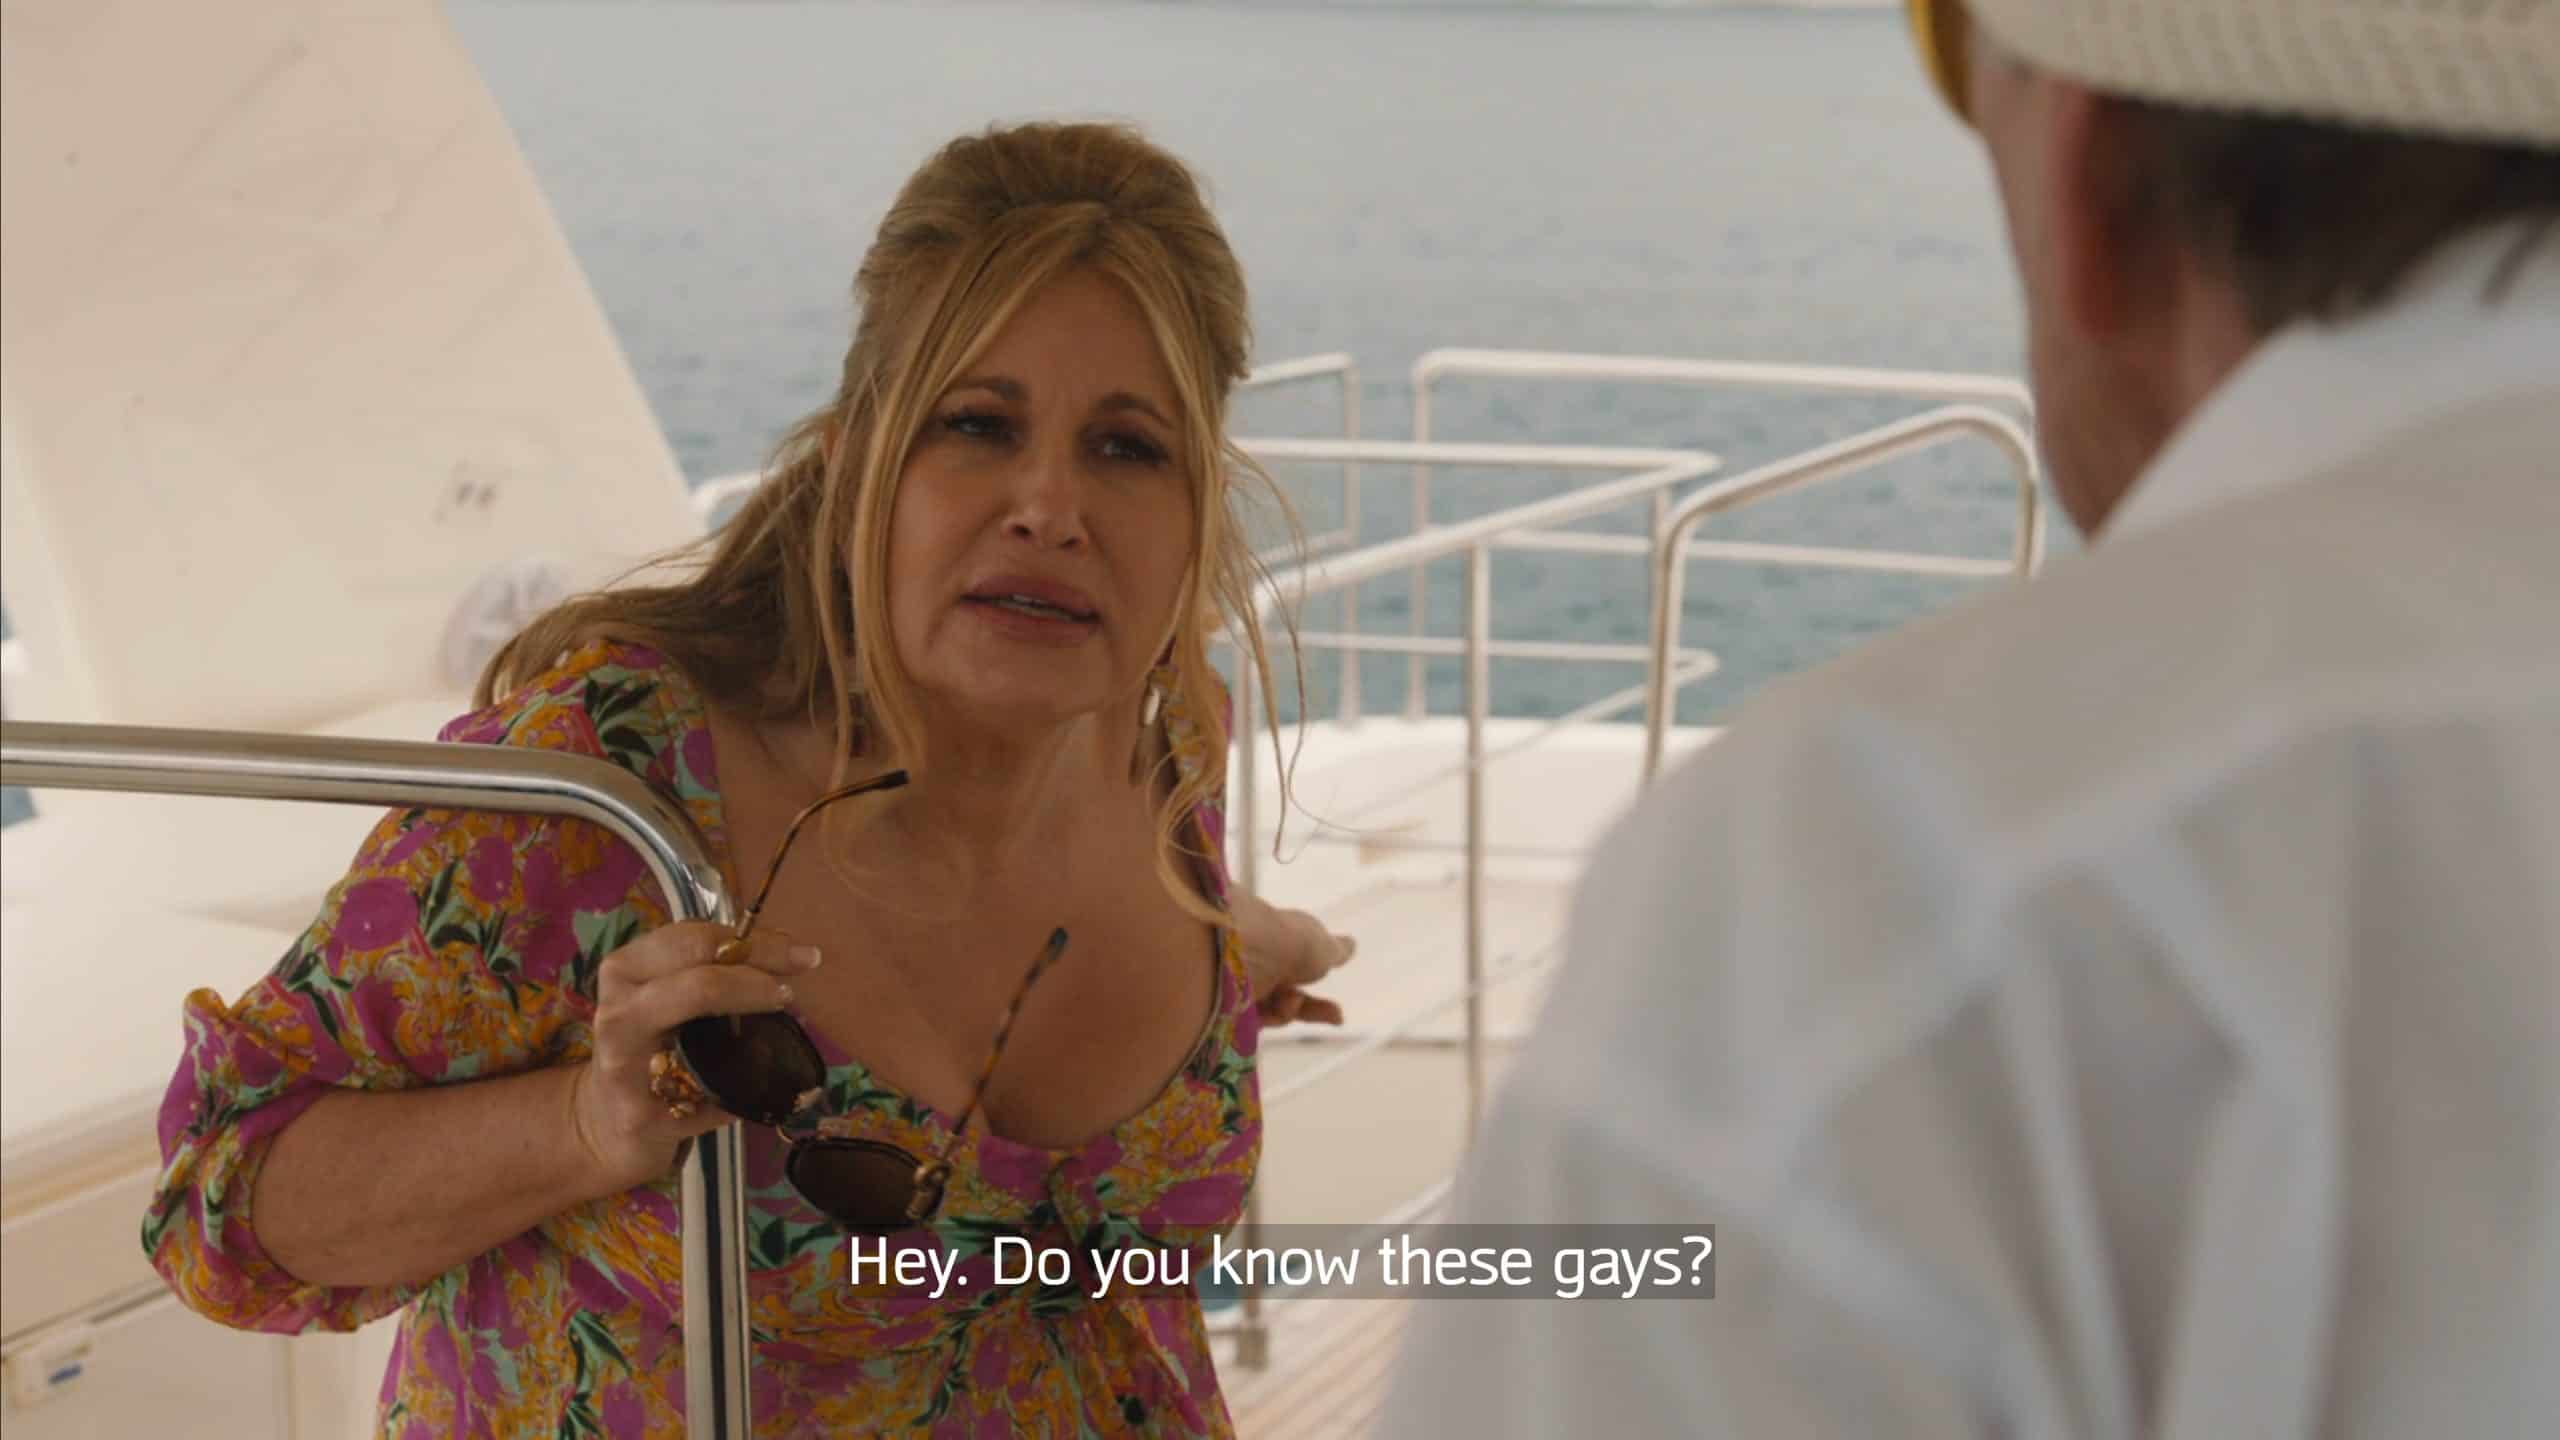 Tanya seeing if the driver of the yacht could maybe help her